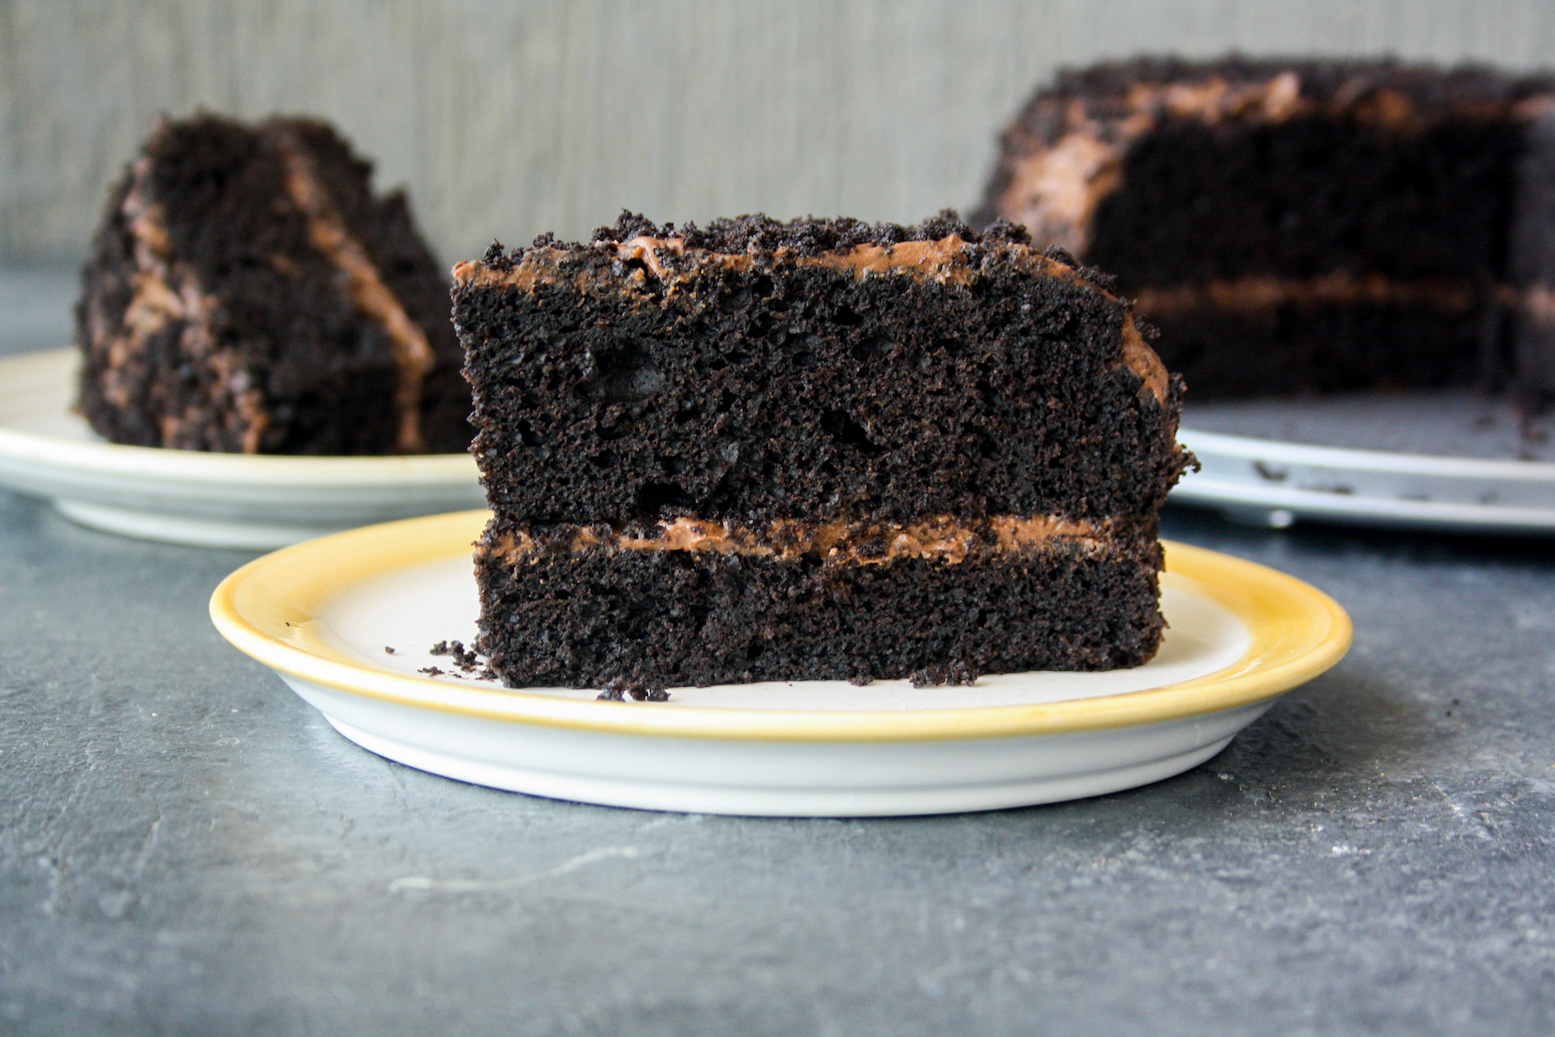 Rich, moist chocolate cake filled with chocolate pudding and covered in cake crumbs!